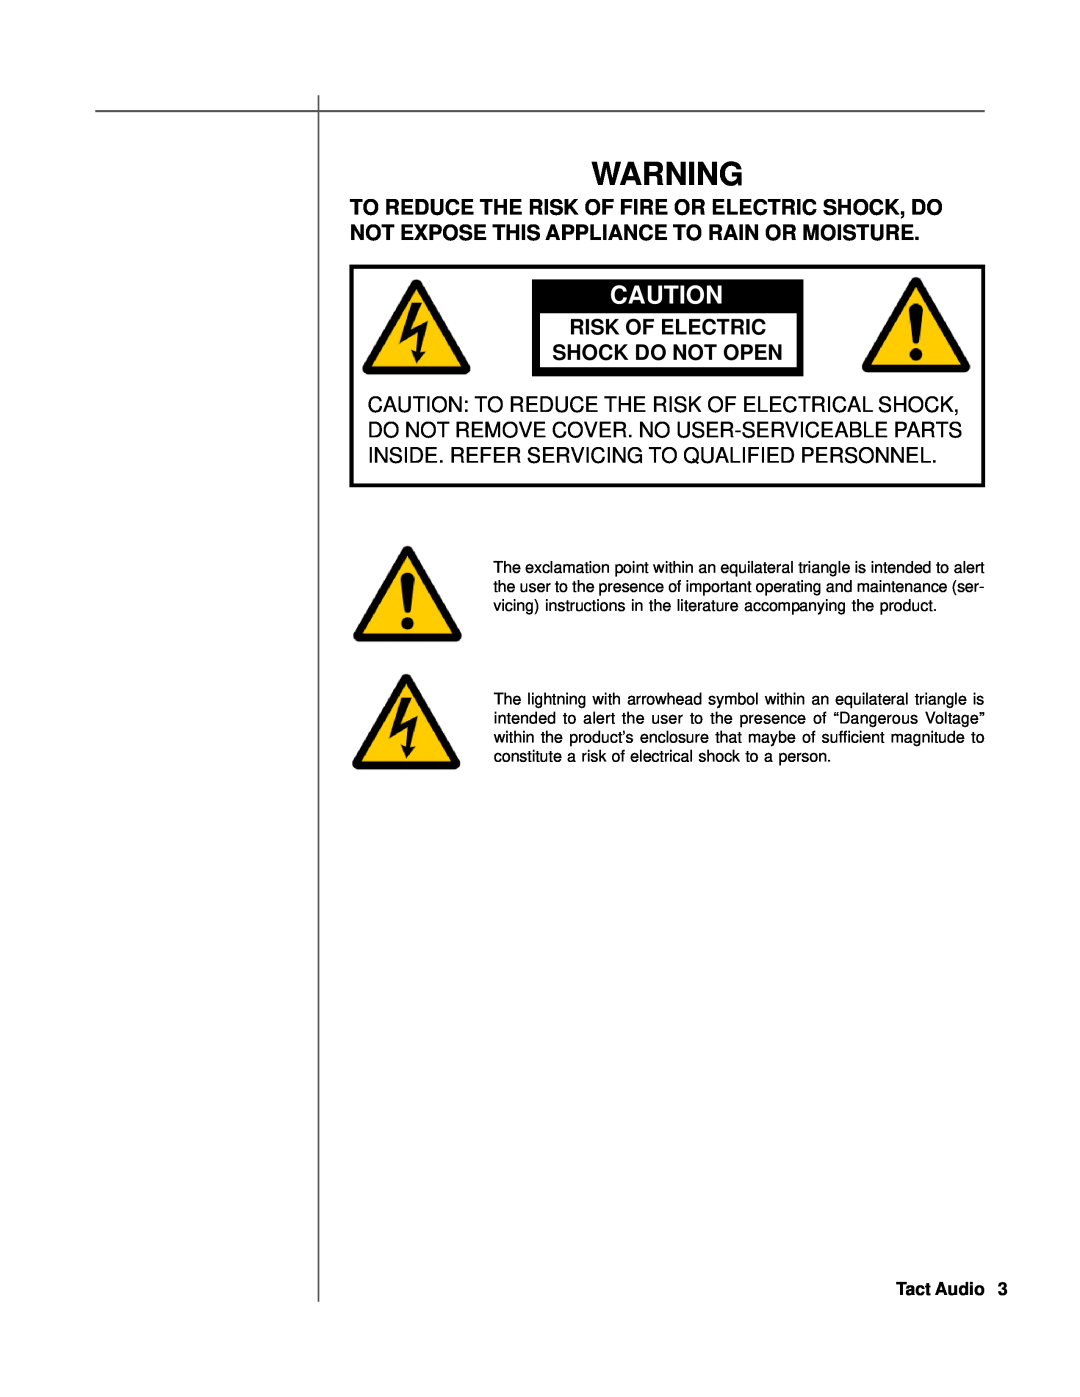 TacT Audio M2150, S2150 owner manual Risk Of Electric Shock Do Not Open, Tact Audio 